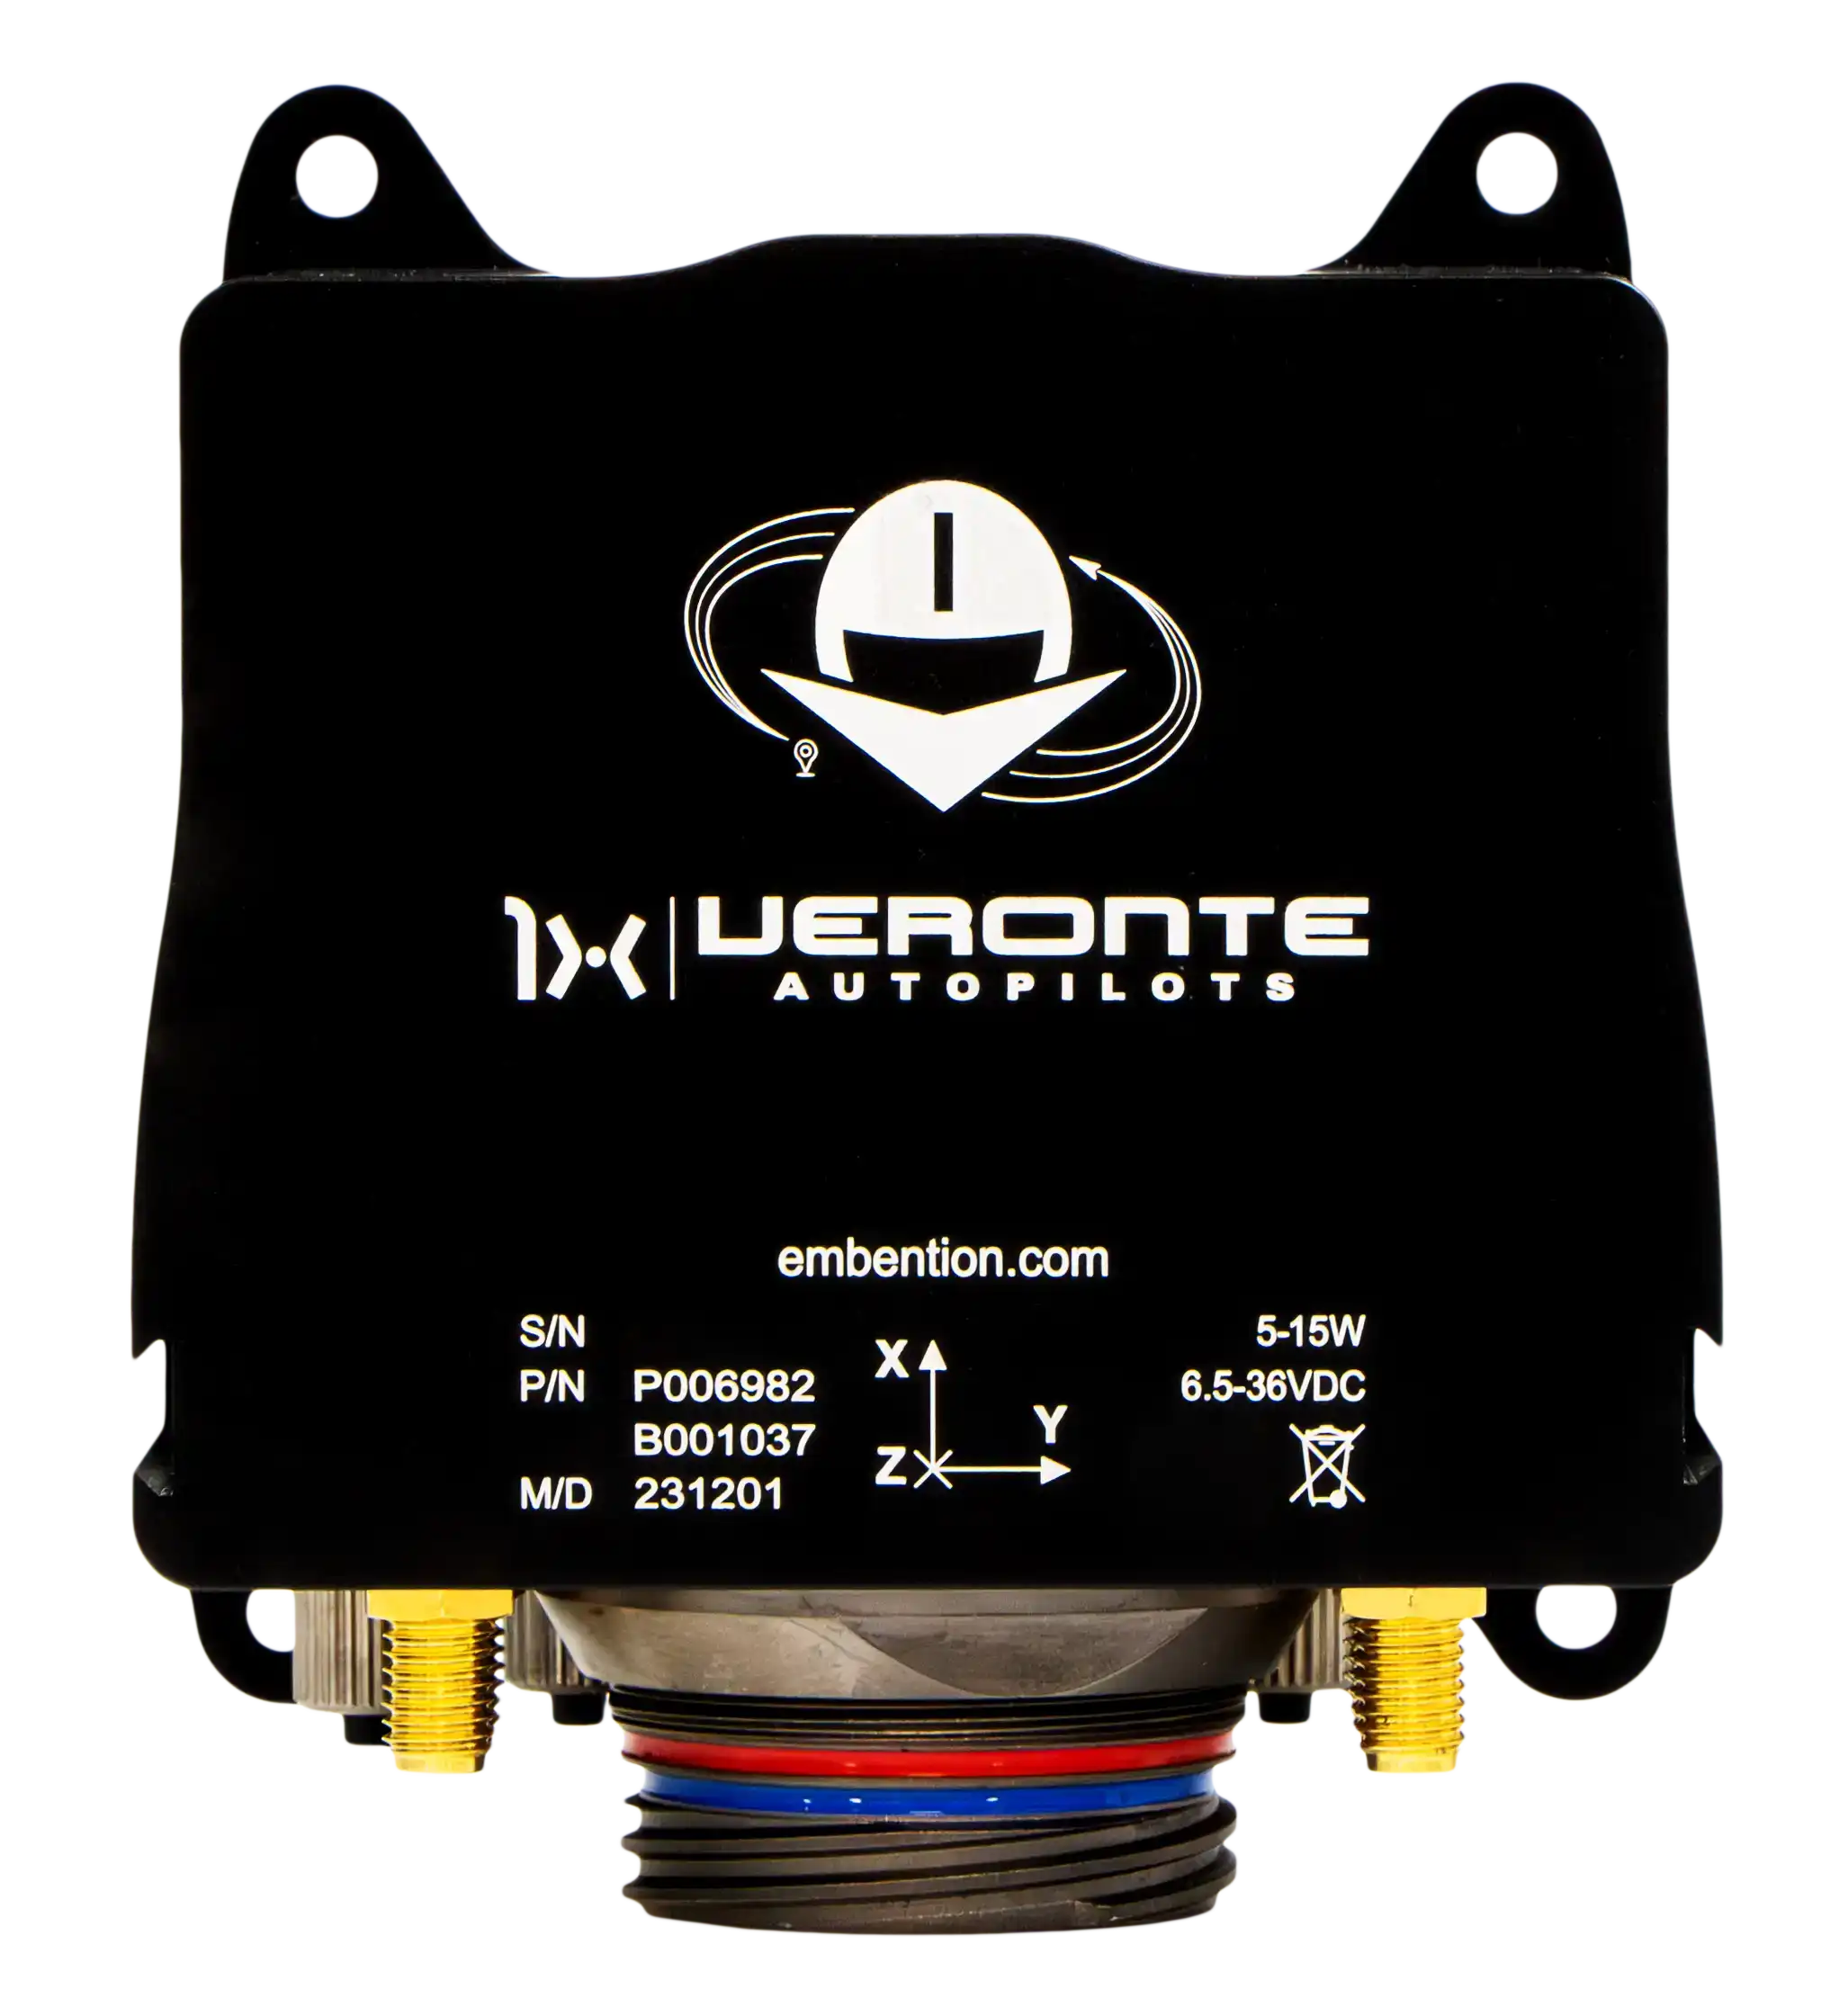 Close-up of a black cube-shaped electronic module labeled 'Veronte Autopilots' with detailed markings including serial numbers and voltage specifications, set against a dark background